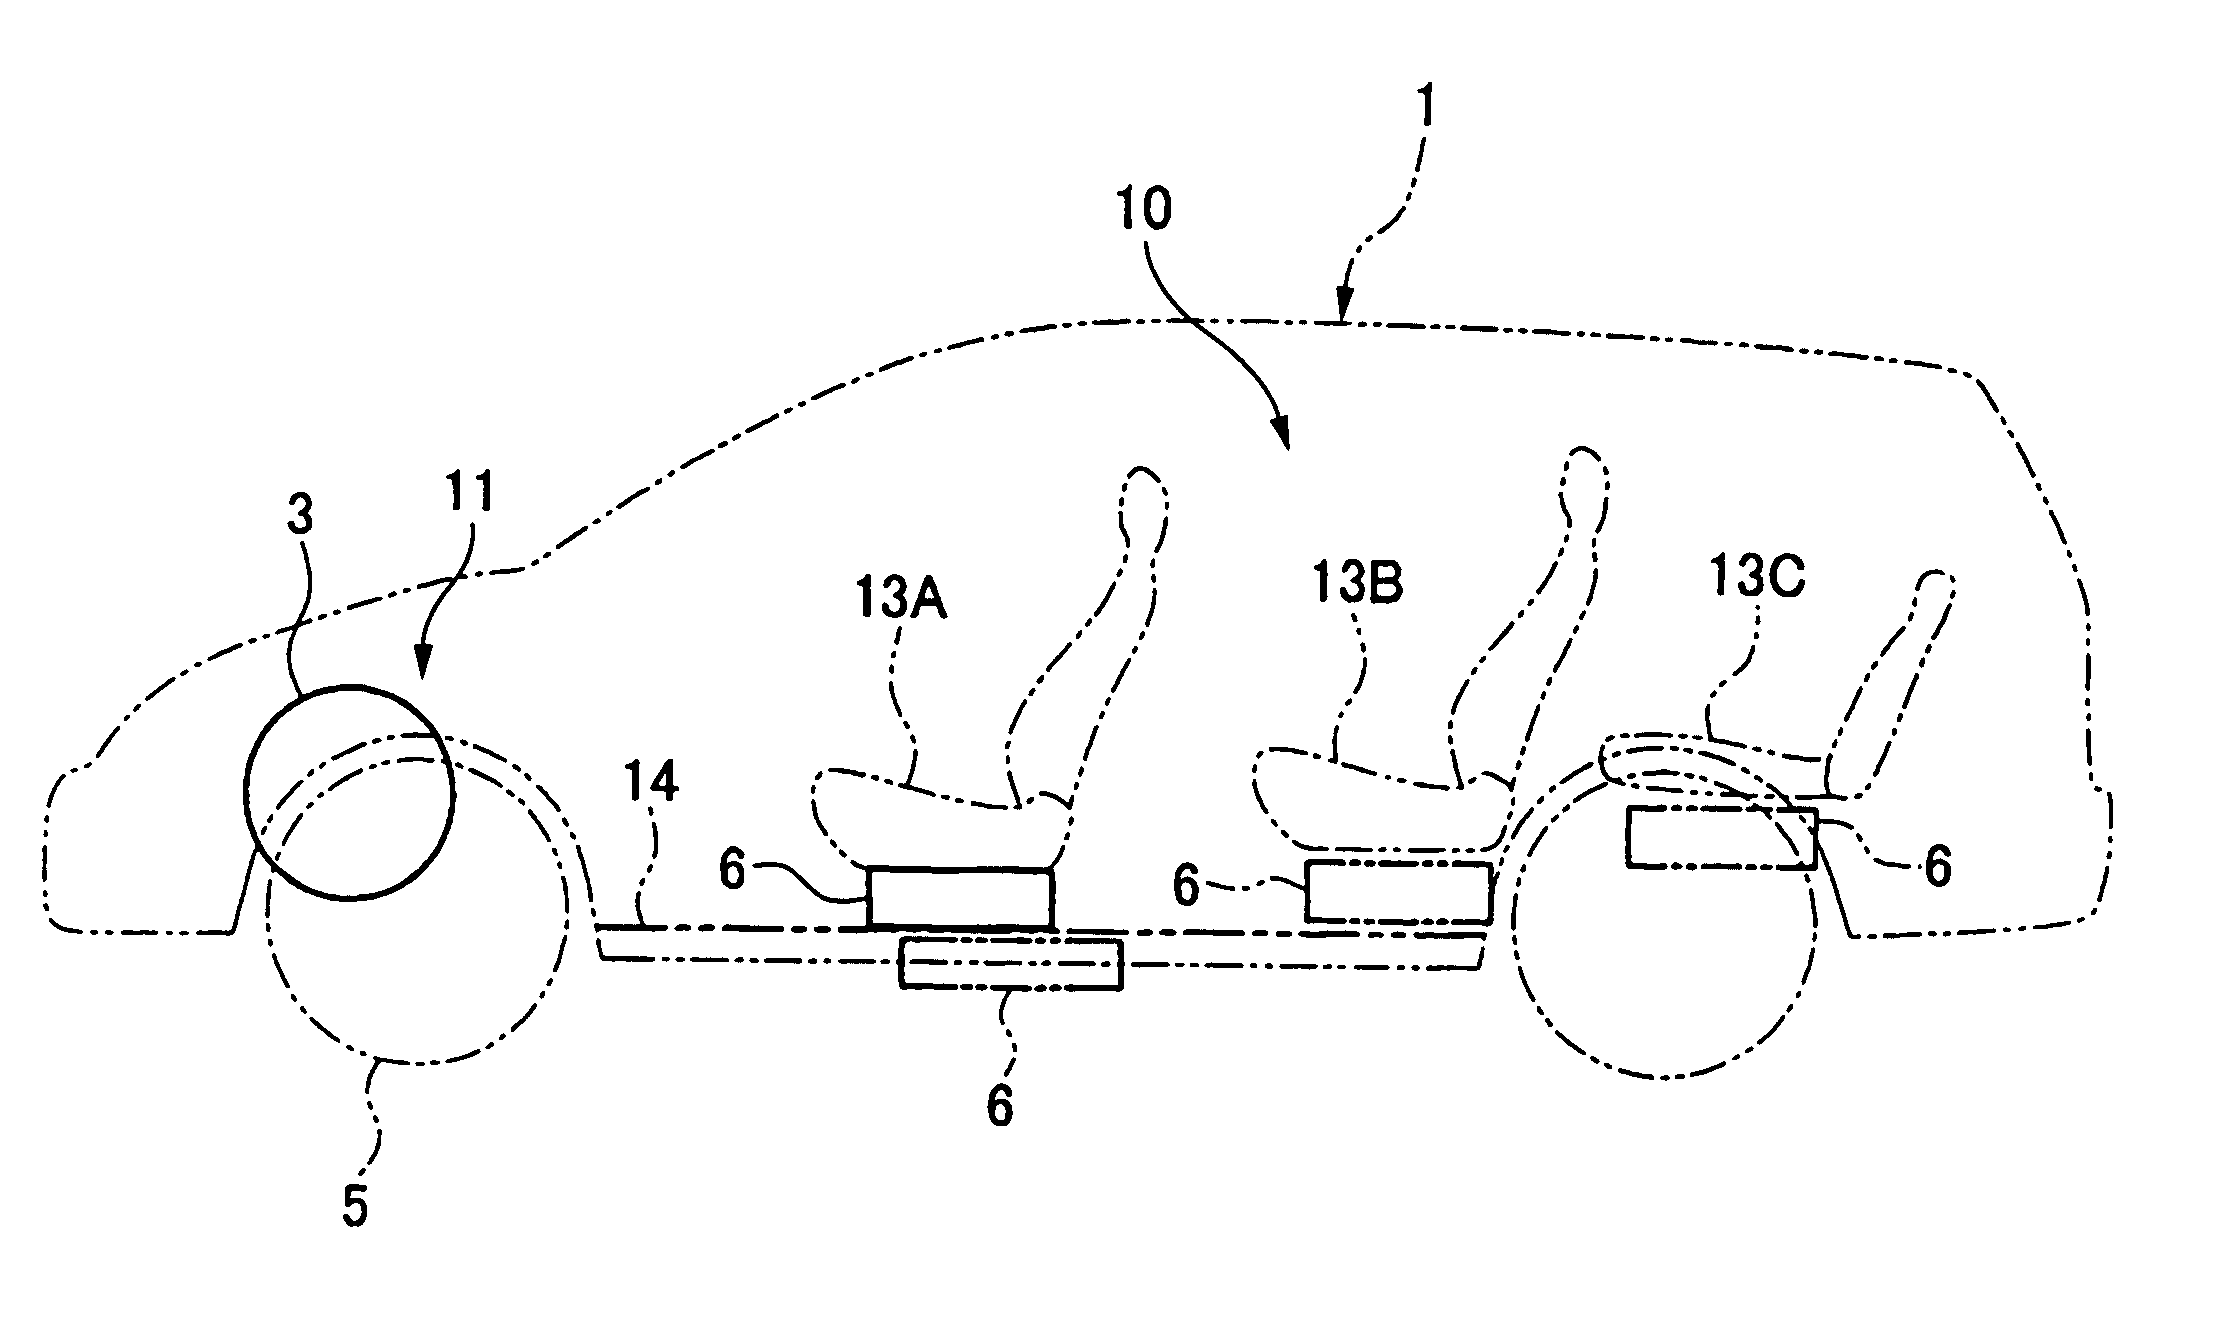 Vehicle power cables retaining structure